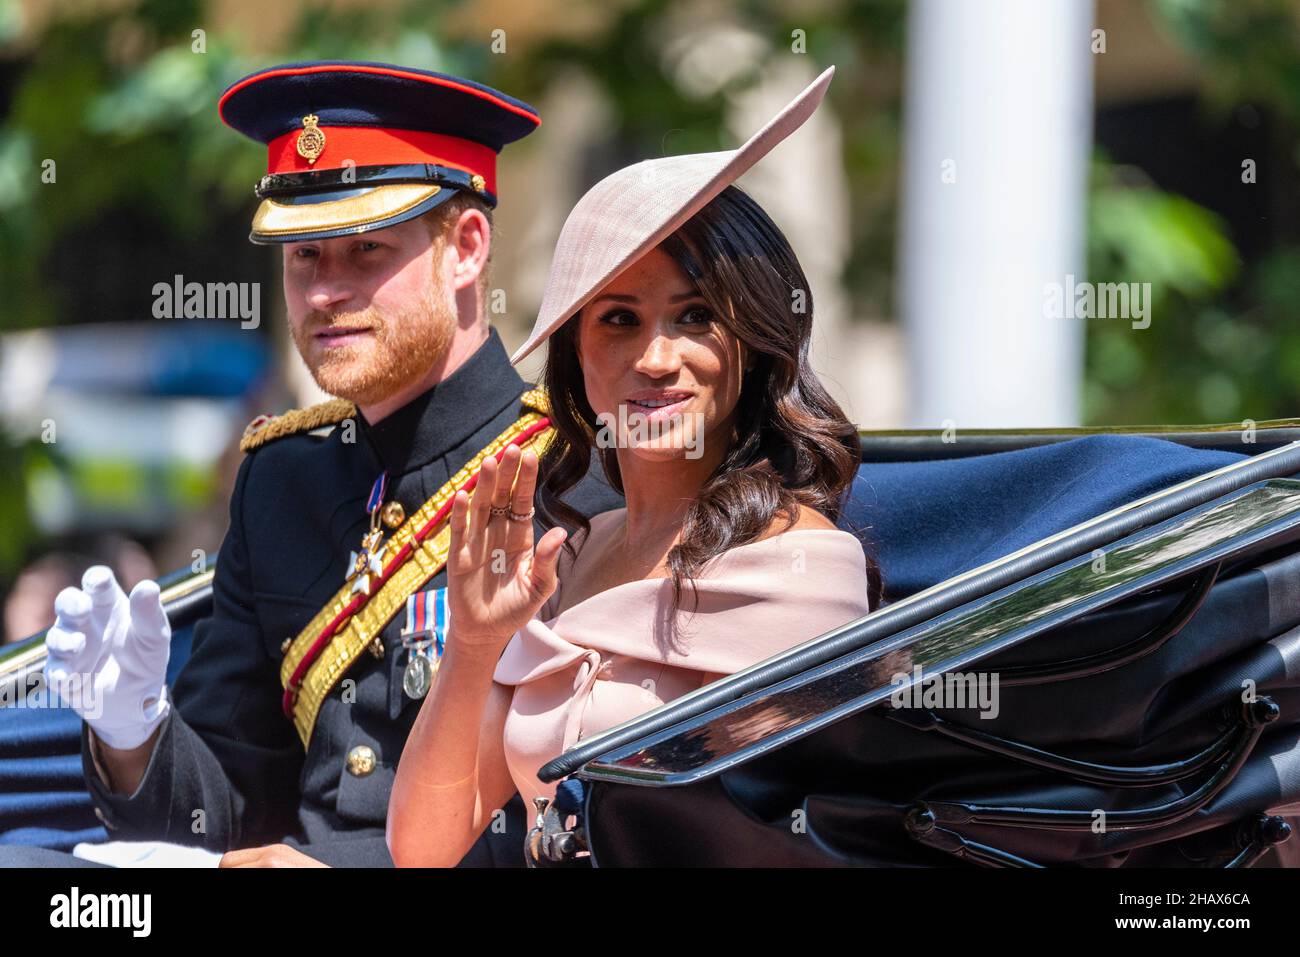 Meghan Markle, Duchess of Sussex, and Prince Harry, Duke of Sussex in carriage on The Mall, London, for Trooping the Colour 2018. Waving Stock Photo